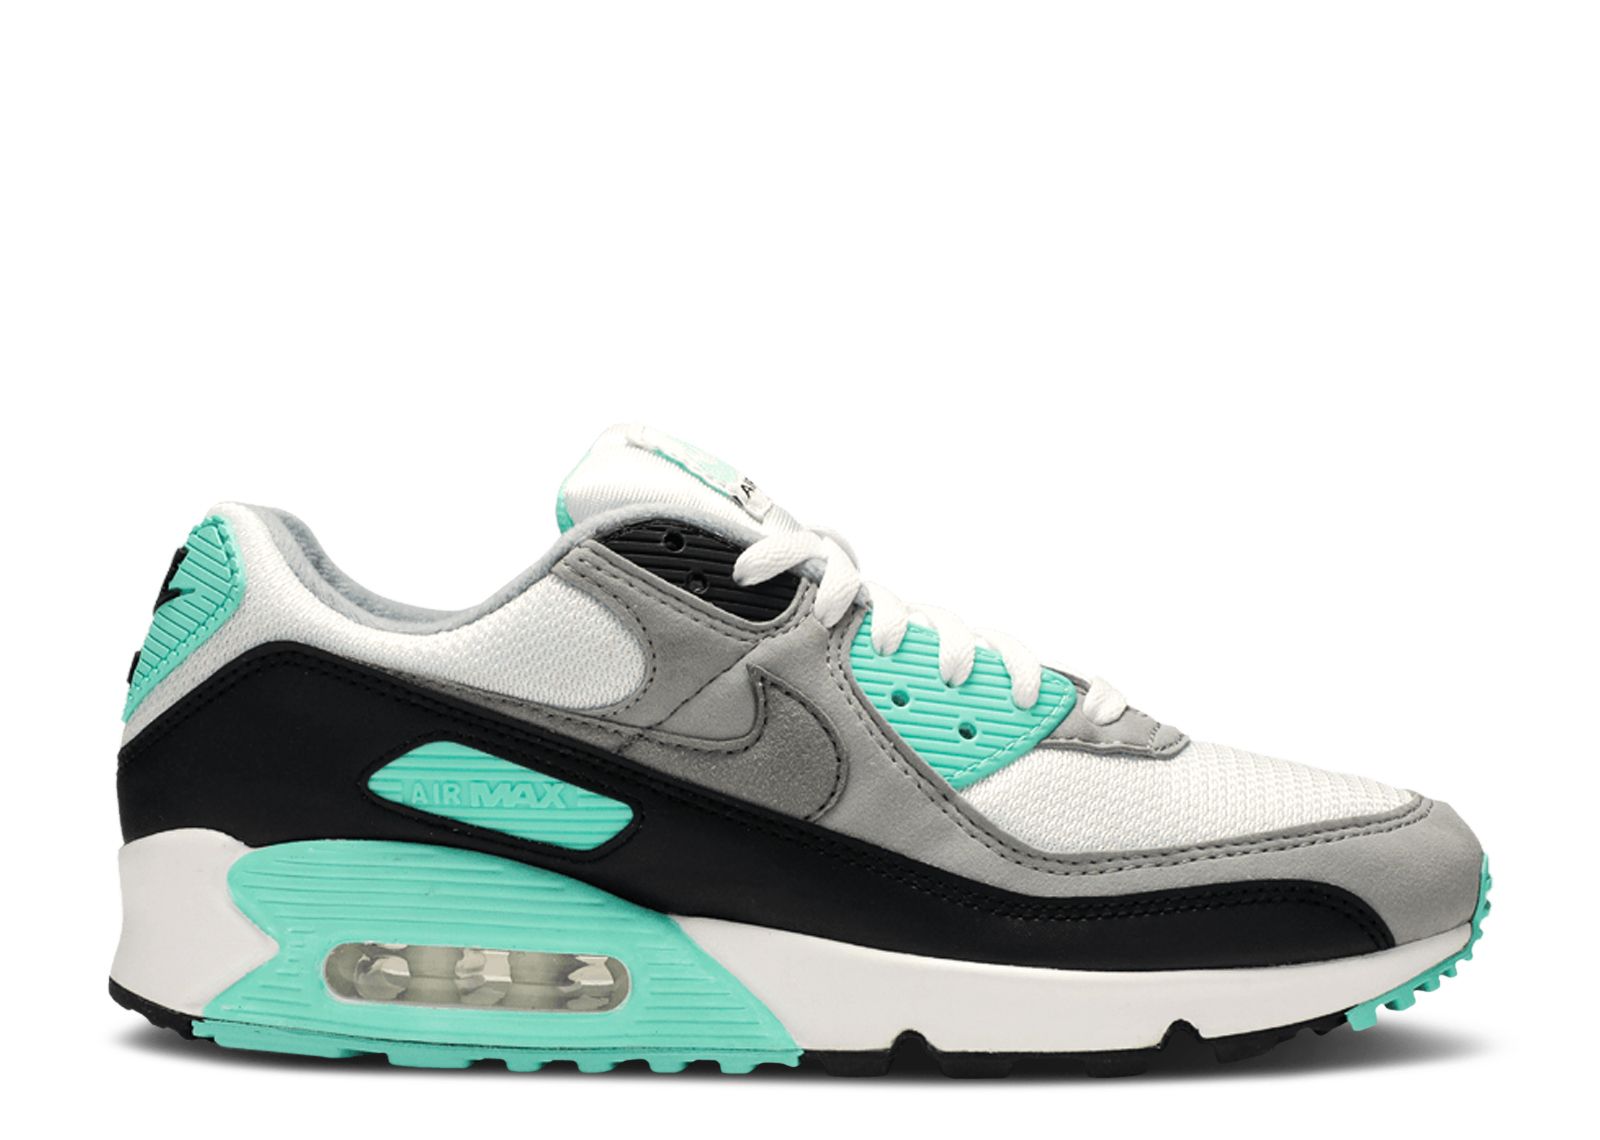 Forfatning Ooze Studiet Air Max 90 'Hyper Turquoise' - Nike - CD0881 100 - white/particle grey/hyper  turquoise/black | Flight Club